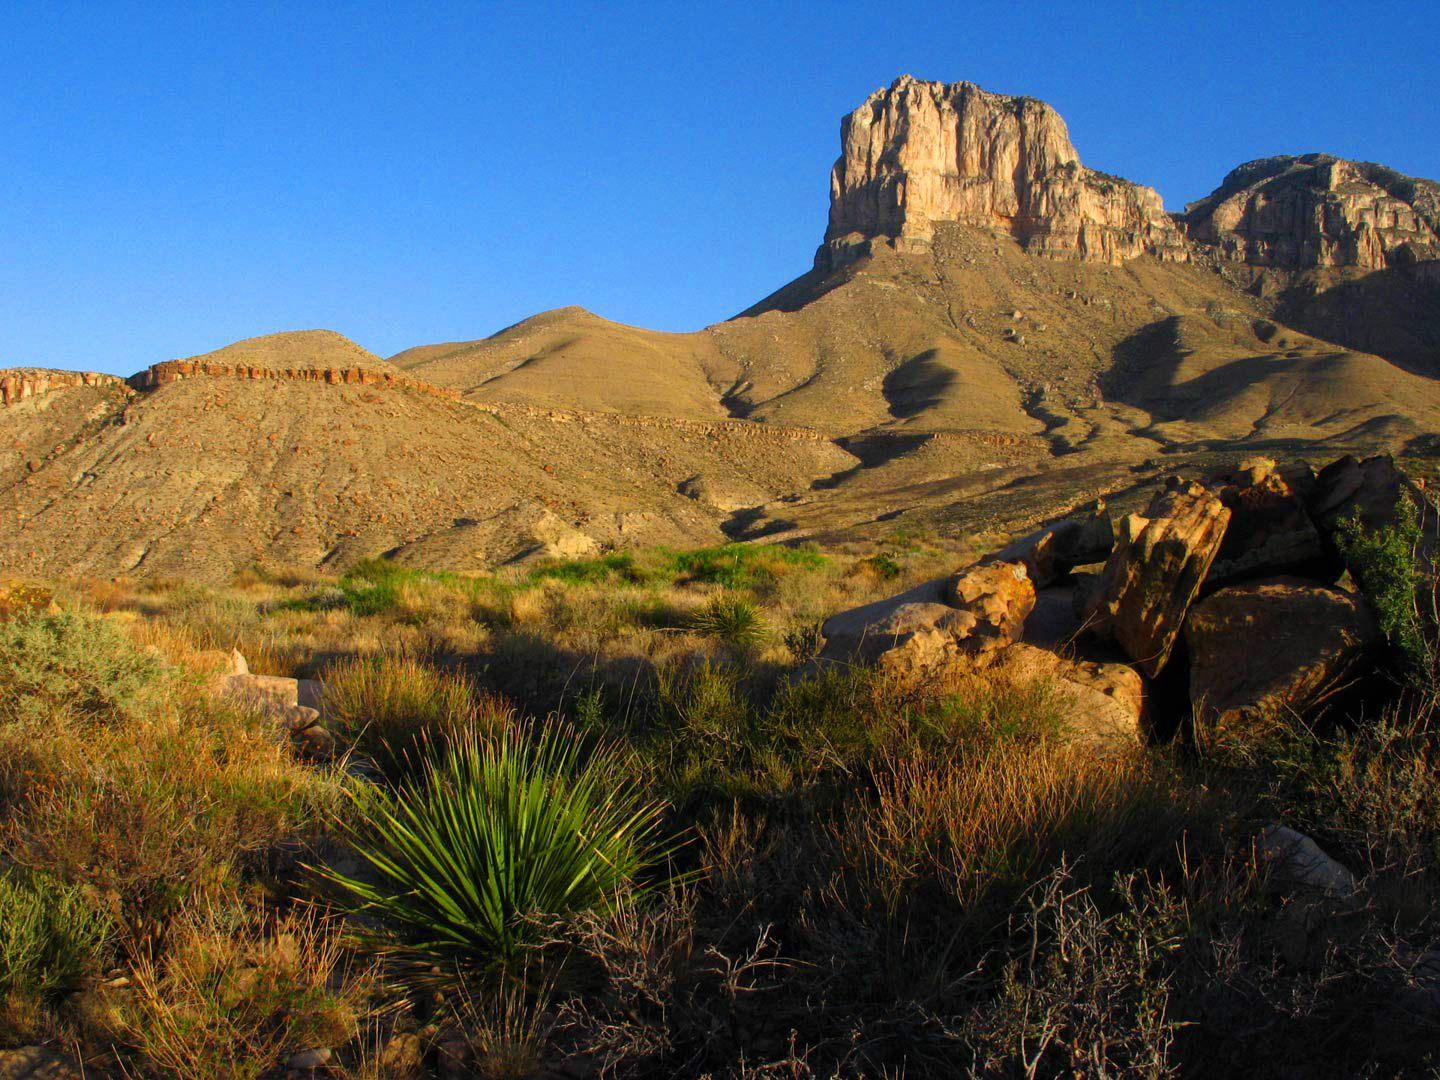 The Guadalupe Mountains (Spanish: Sierra de Guadalupe) are a